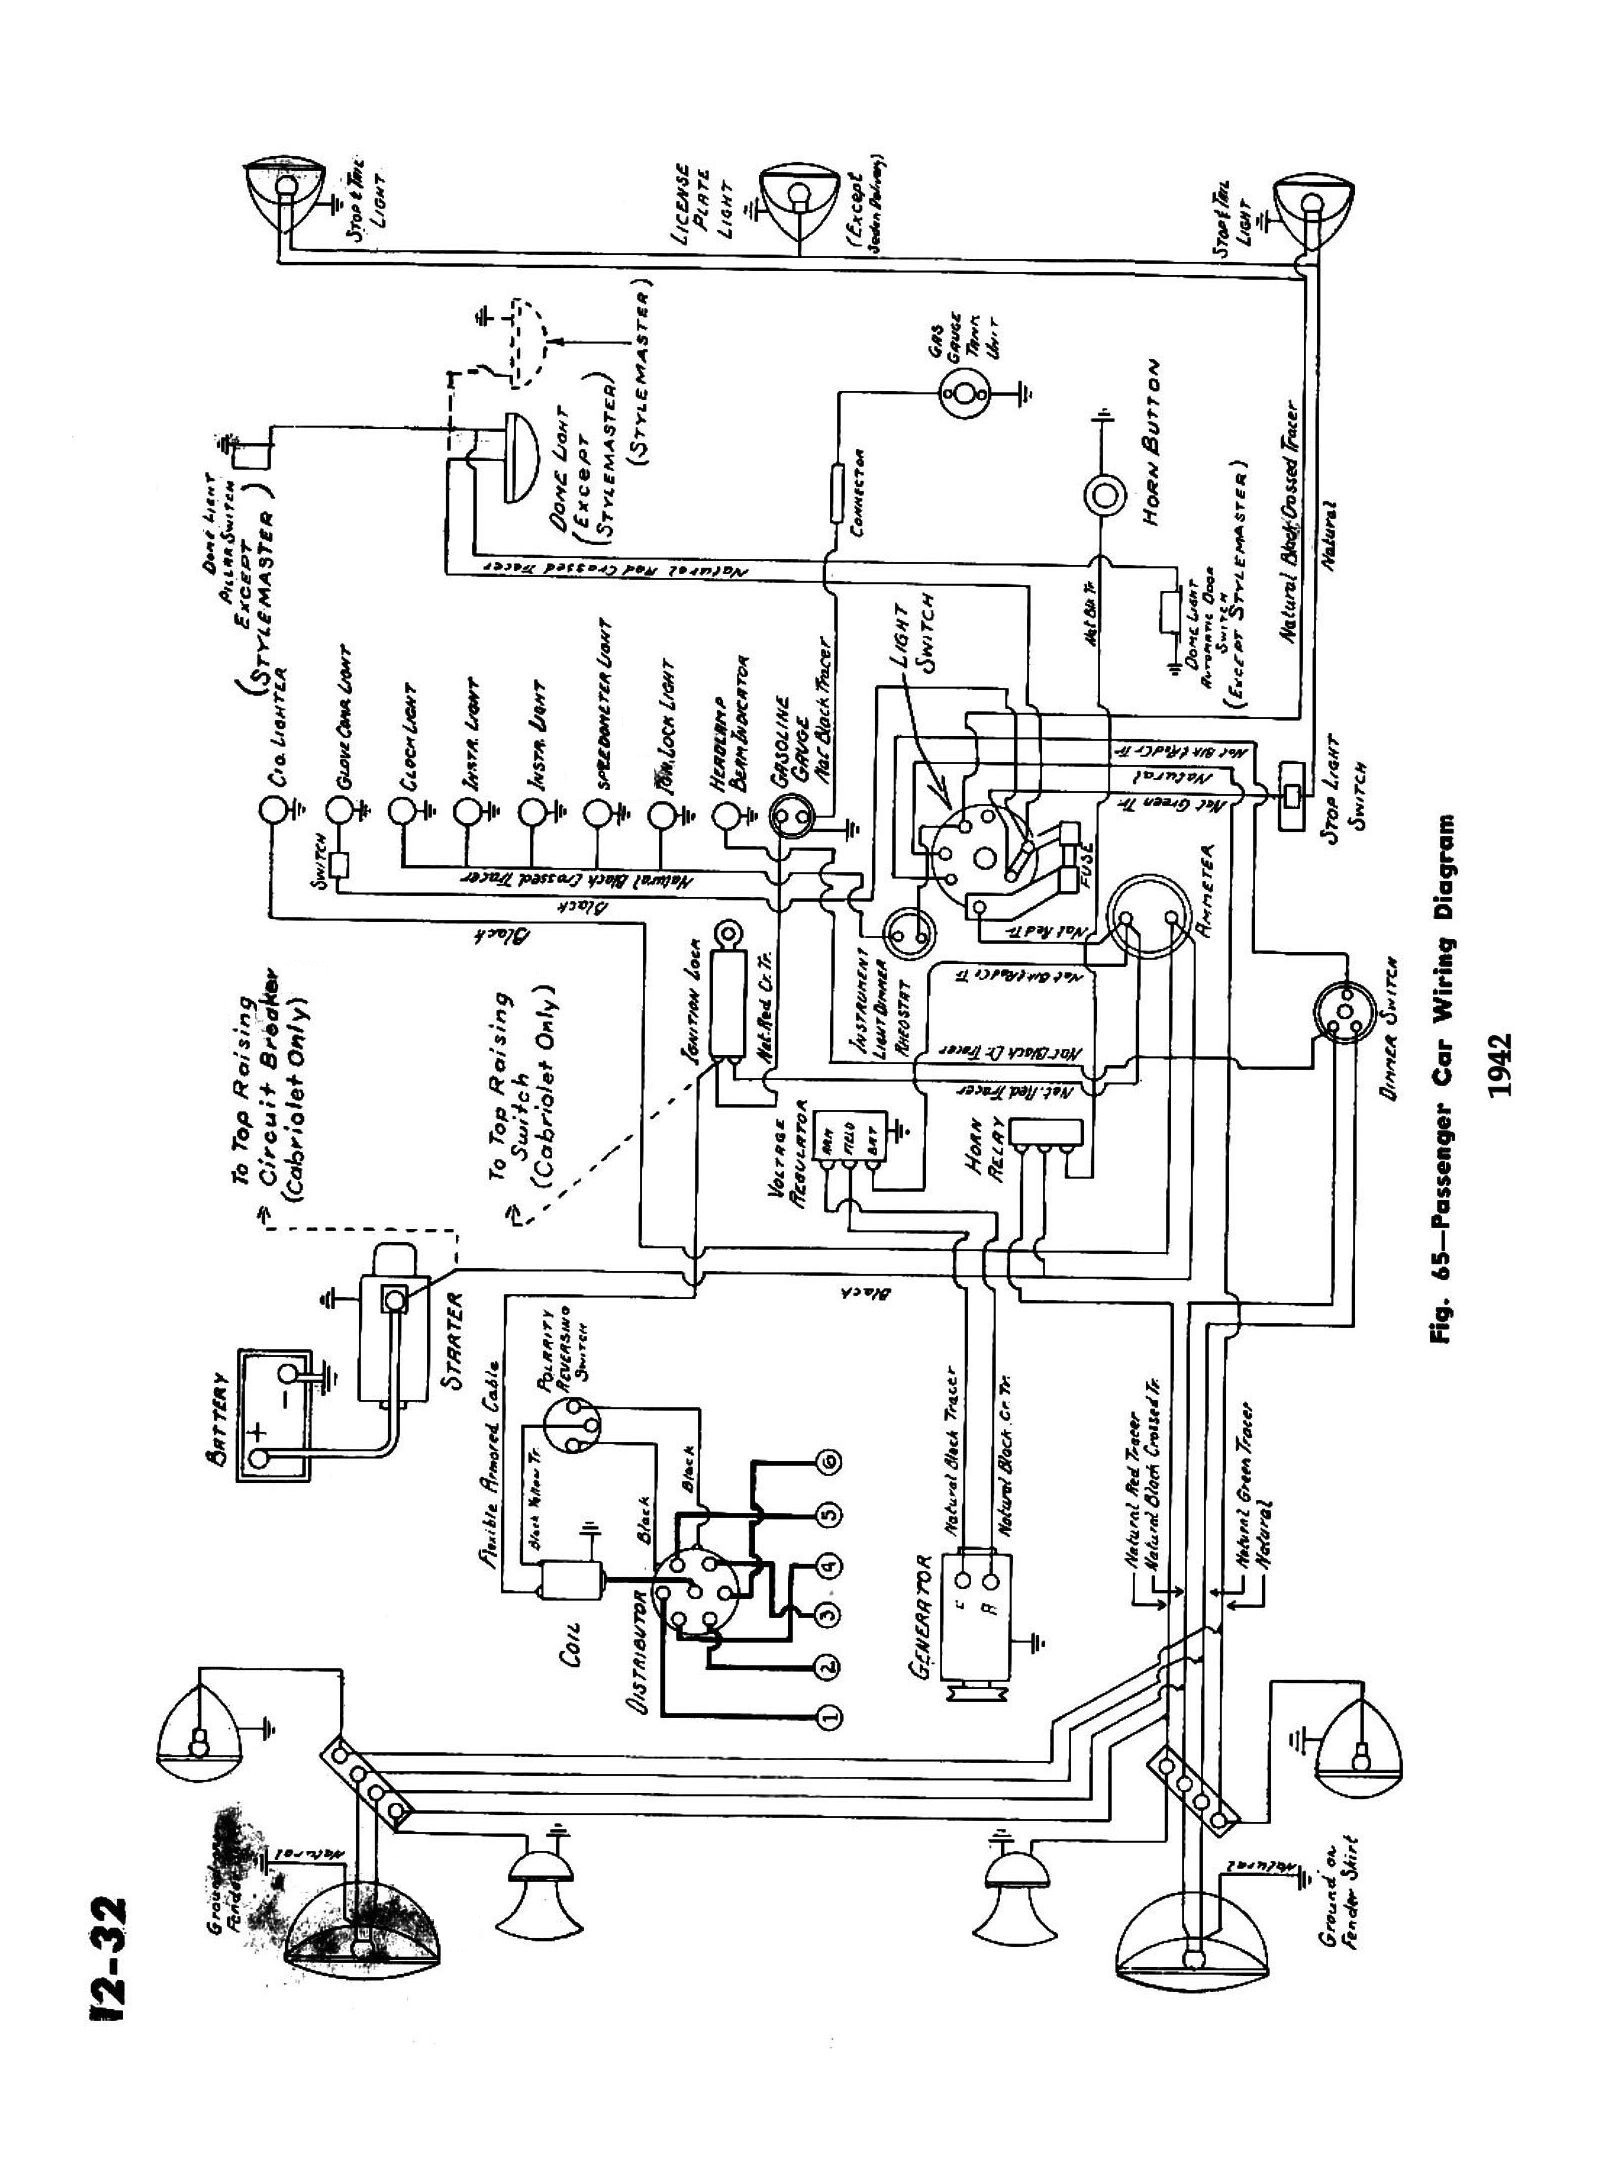 Wiring Diagram For Car Starter Best Chevy Wiring Diagrams